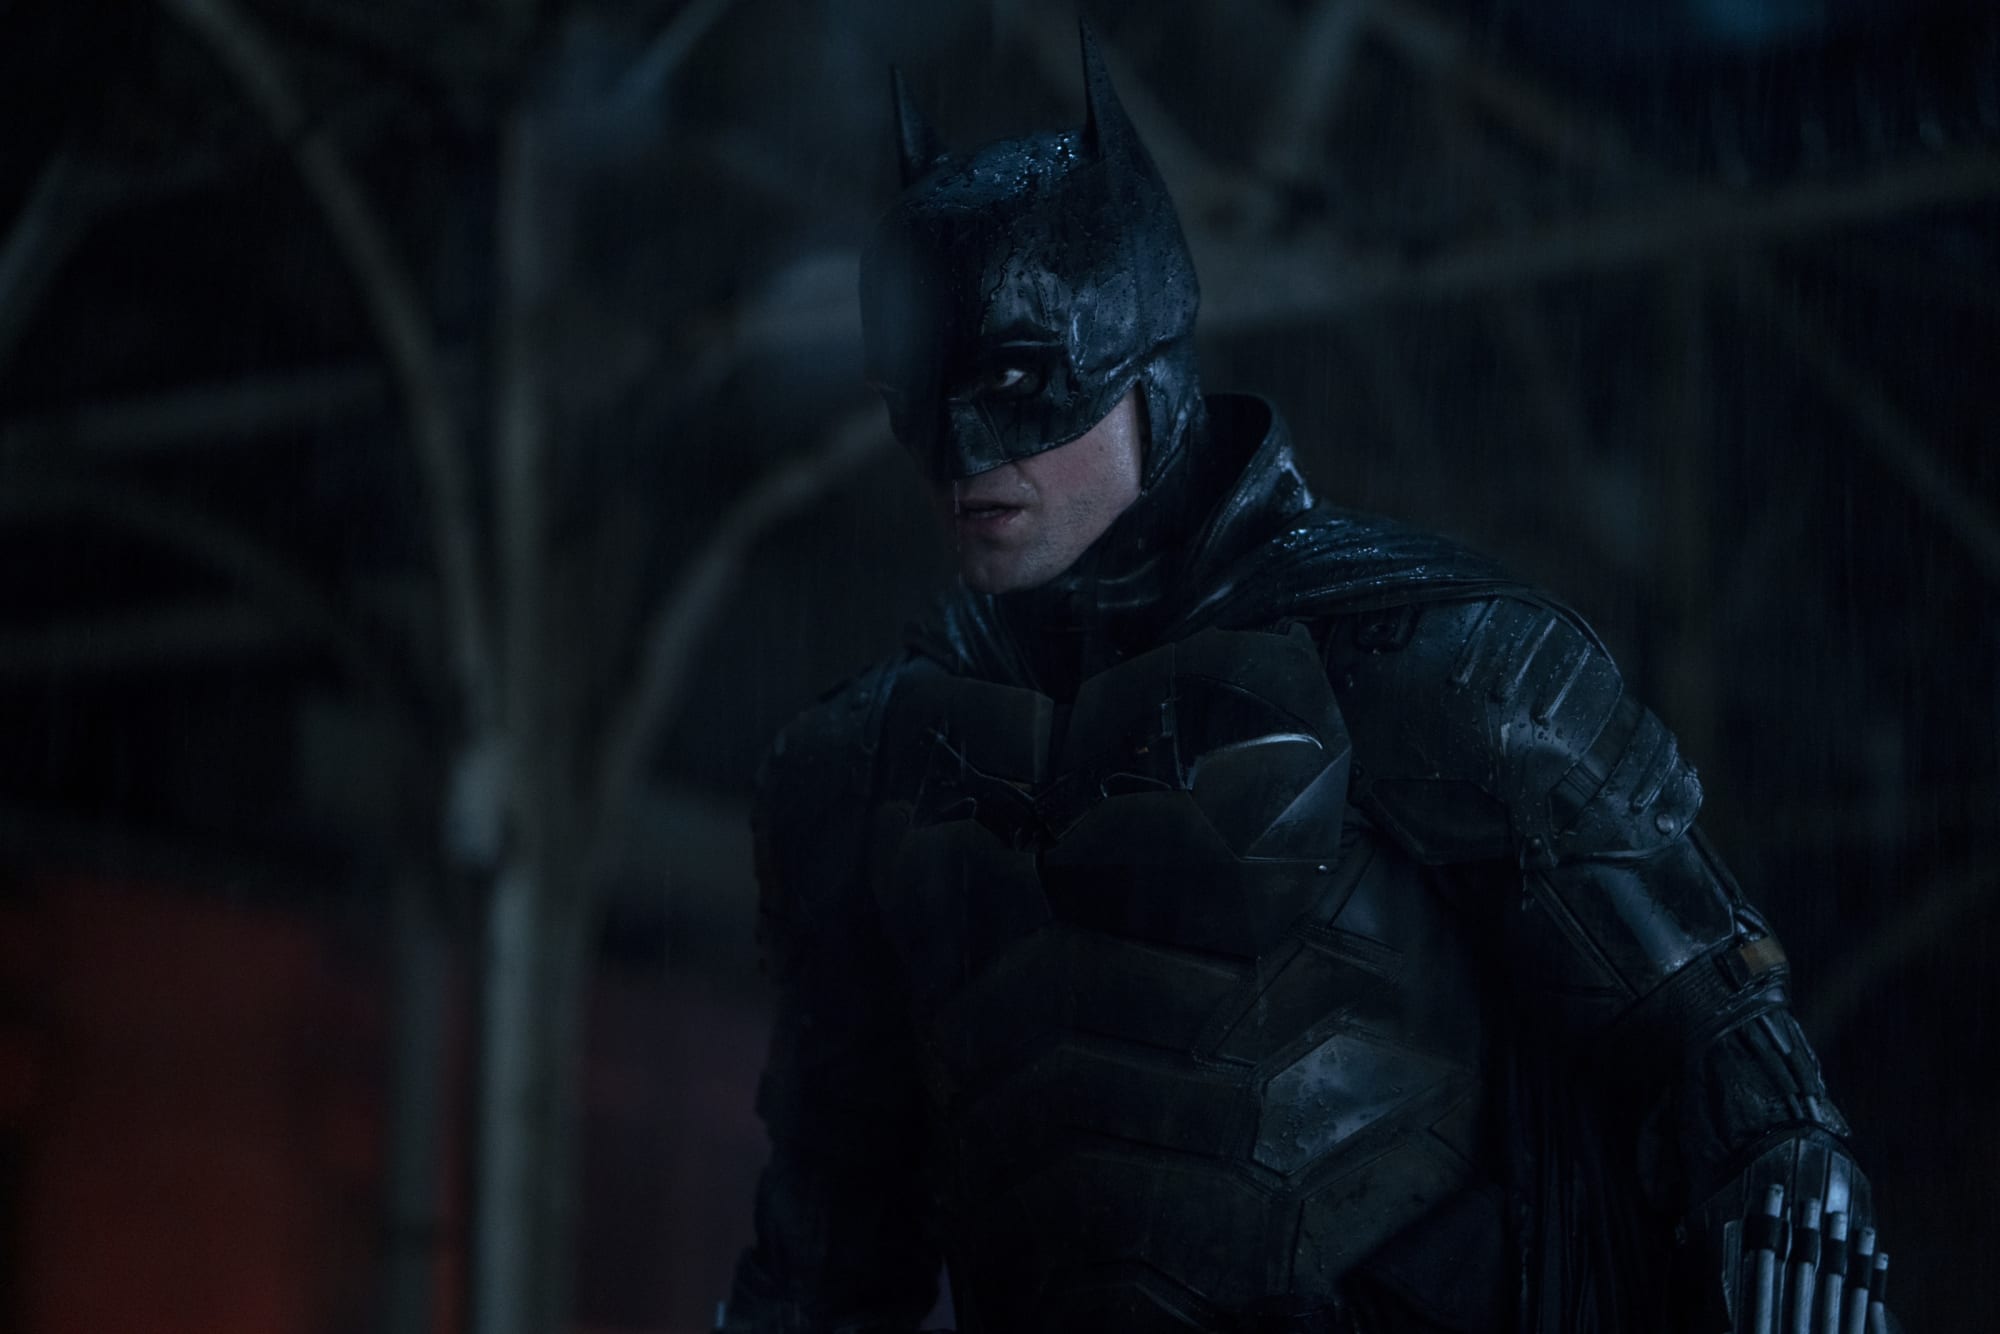 The Batman spoilers: Is Barry Keoghan Two-Face in The Batman movie?